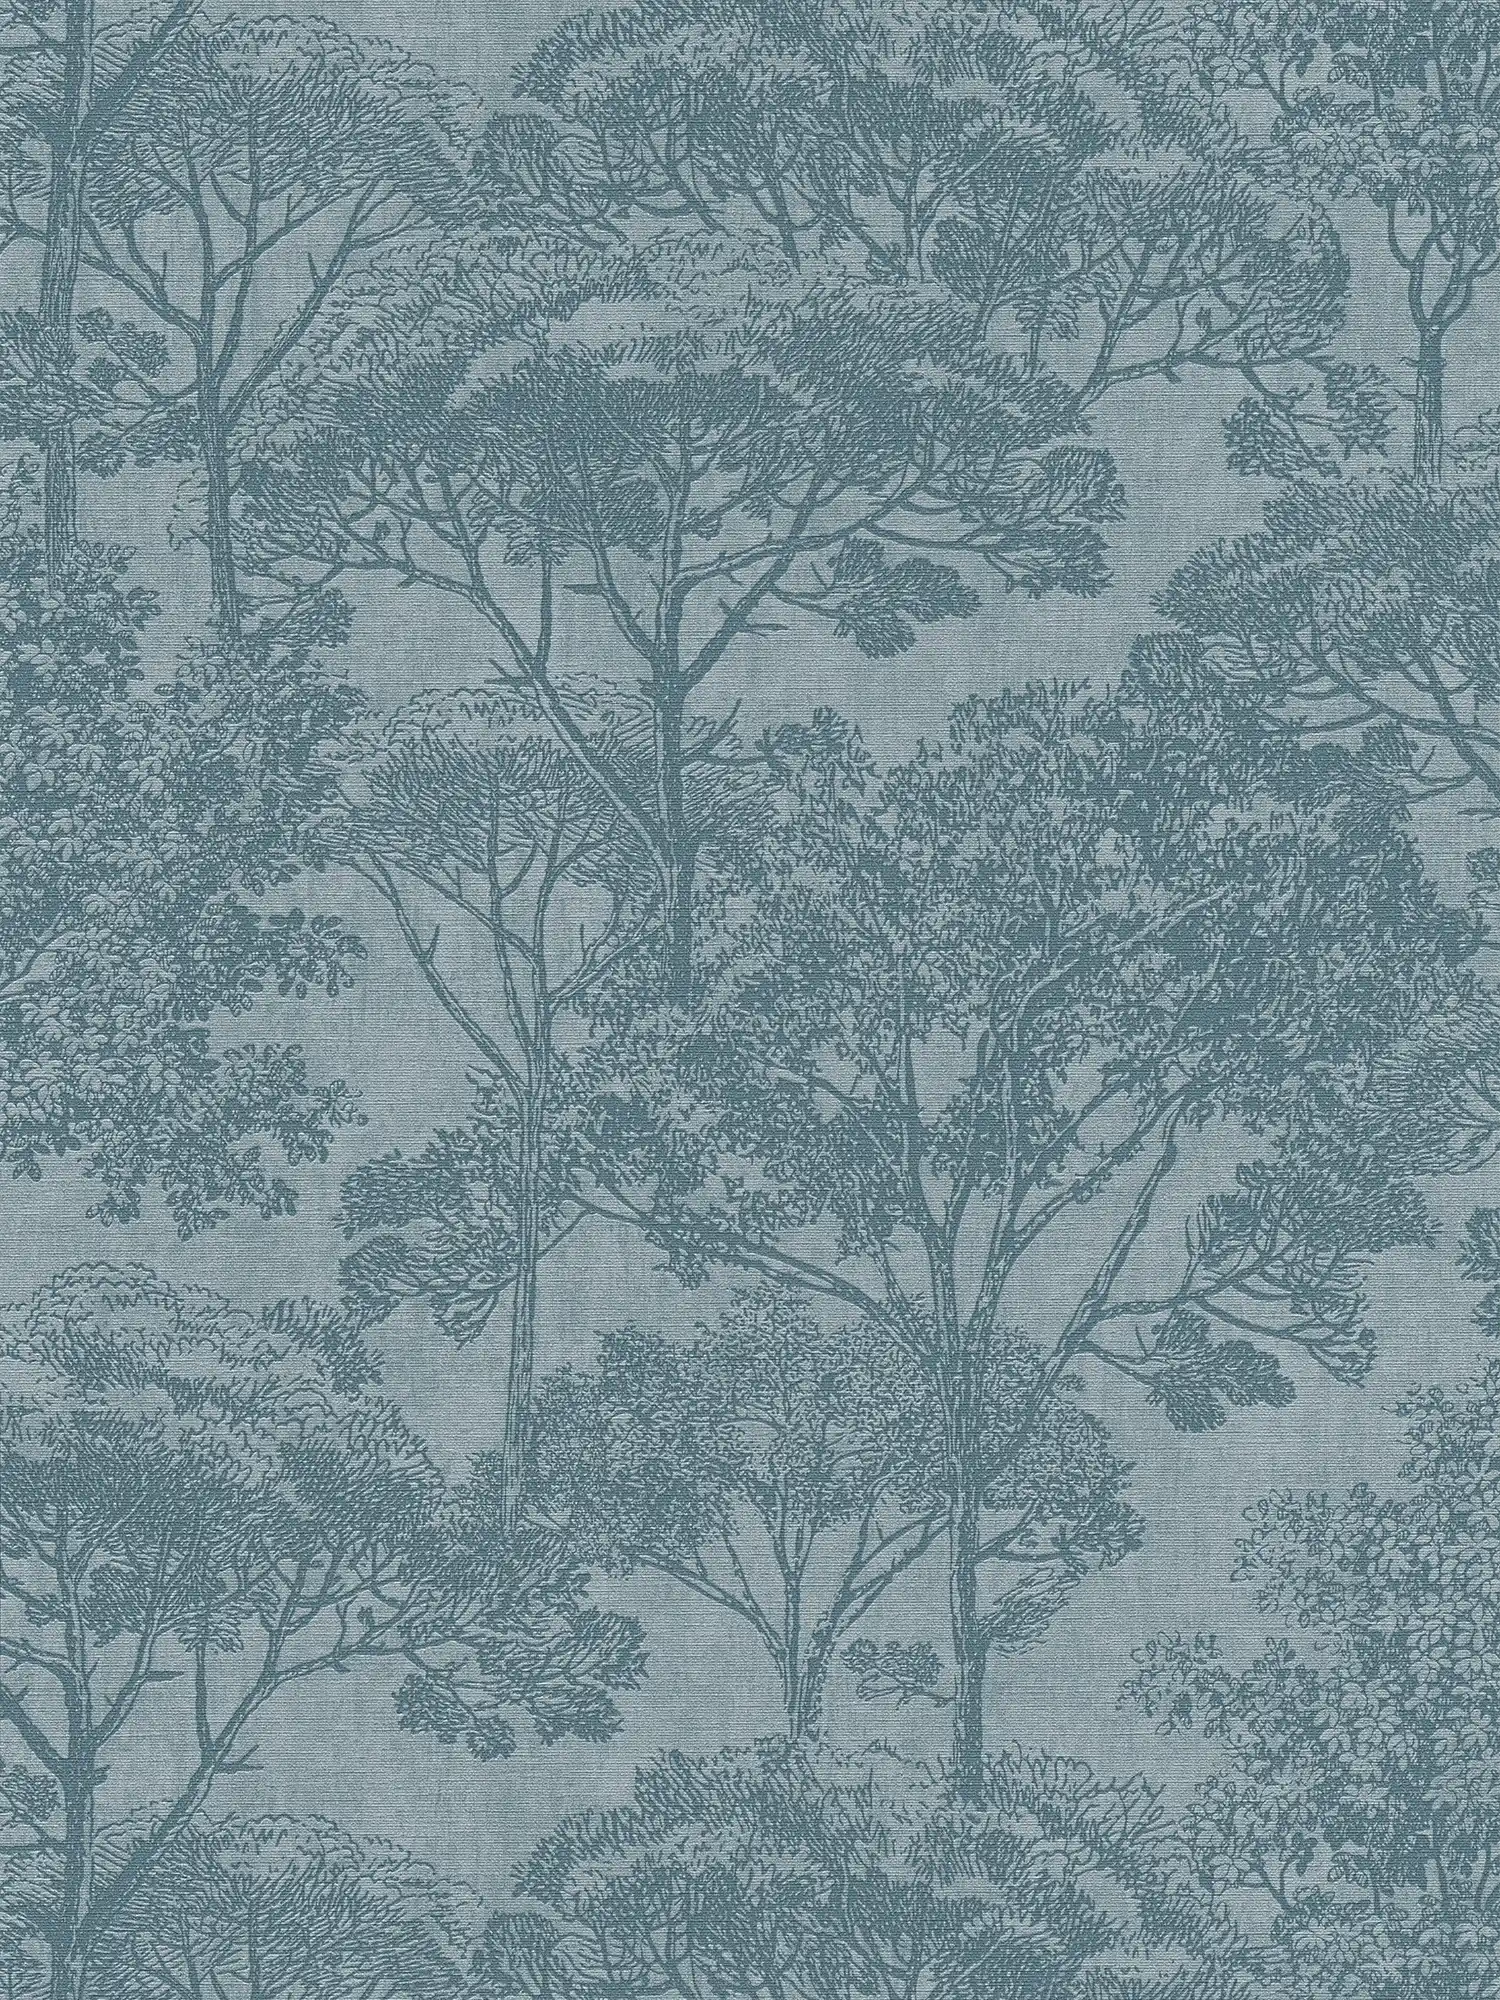 Nature wallpaper petrol with linen look & tree pattern - blue
